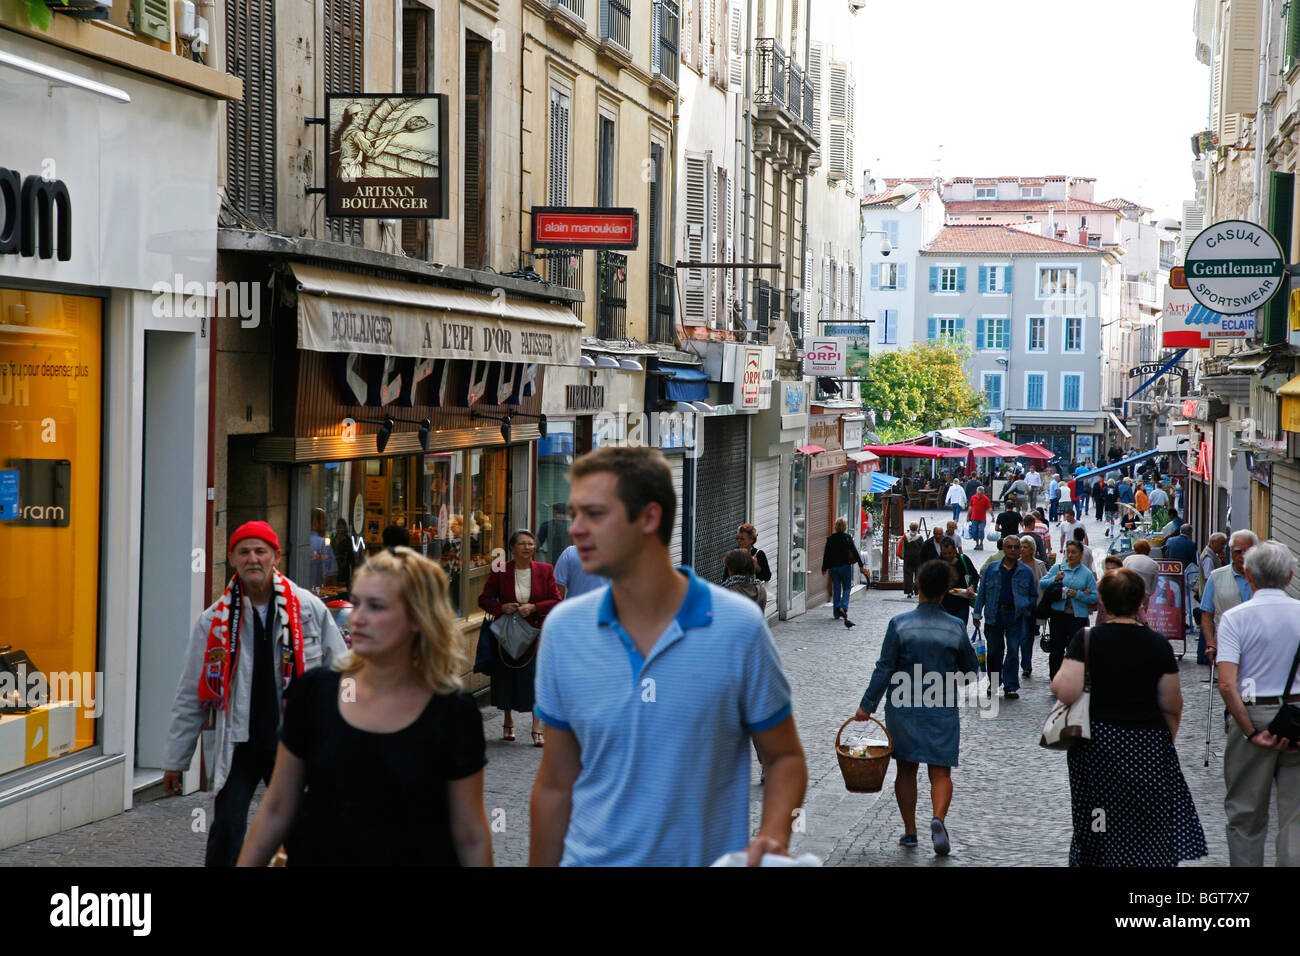 Vieil Antibes, street scene in the old town, Antibes, Alpes Maritimes, Provence, France. Stock Photo